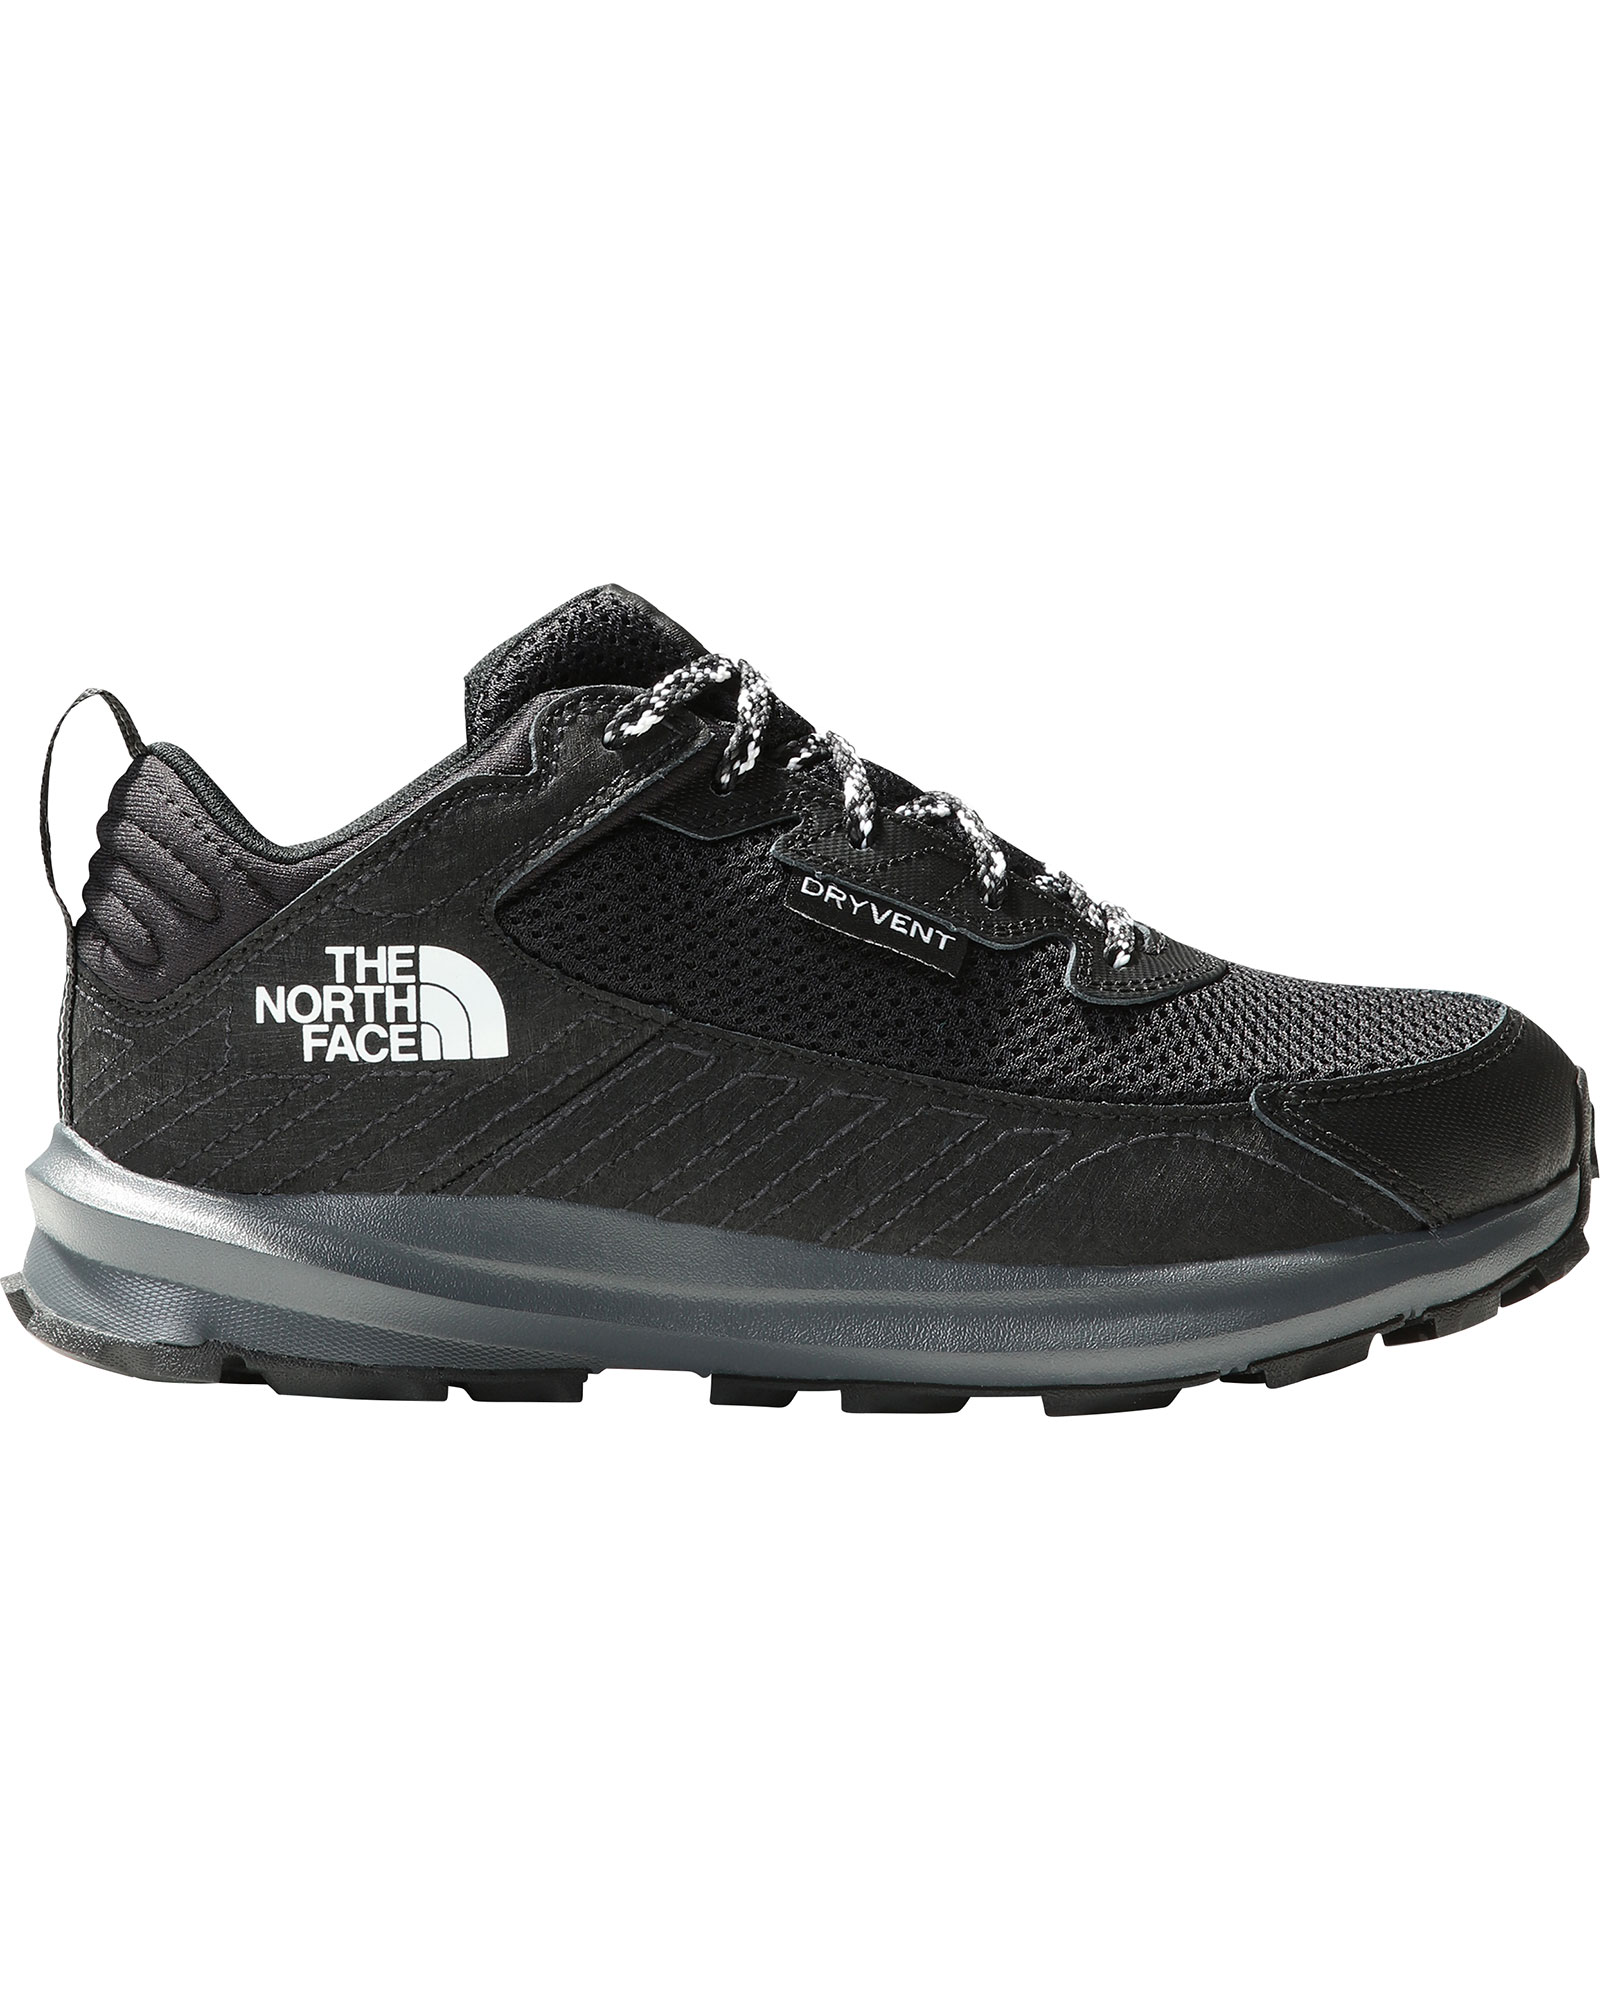 The North Face Youth Fastpack Hiker Kid’s Waterproof Shoes - TNF Black/TNF Black UK 1